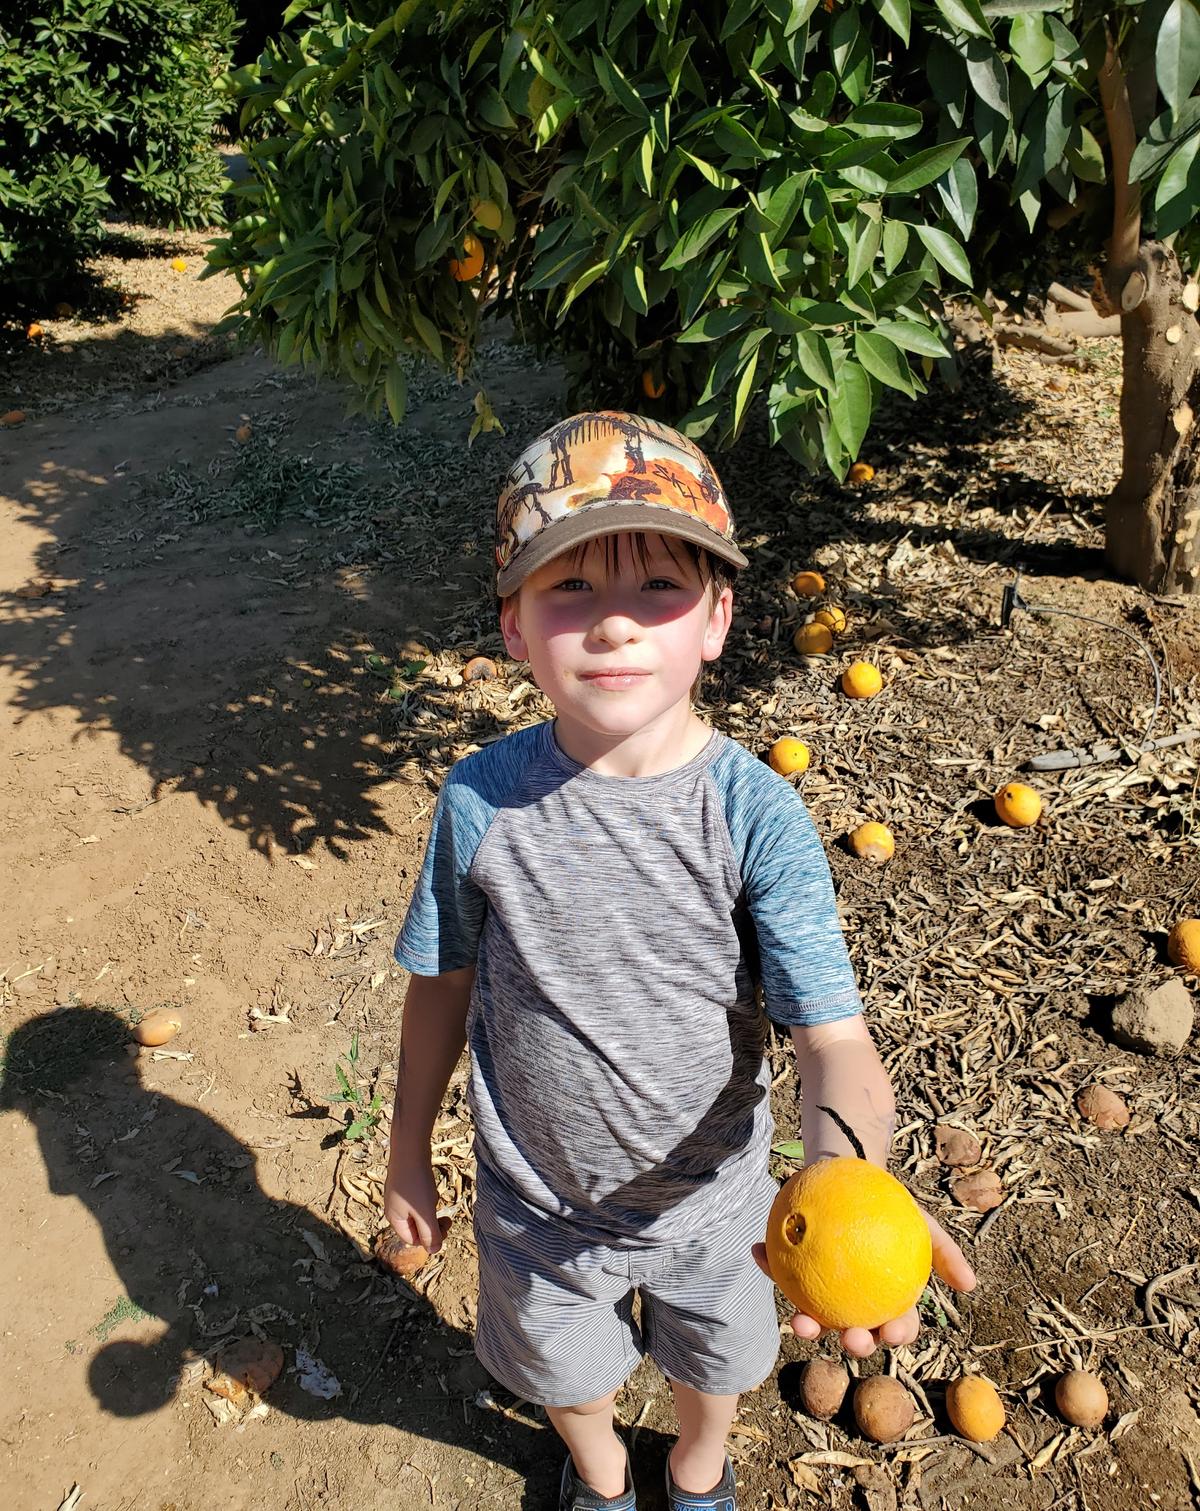 Gabriel helps with the orange harvest in the orchard. (Courtesy of Pearson Ranch)